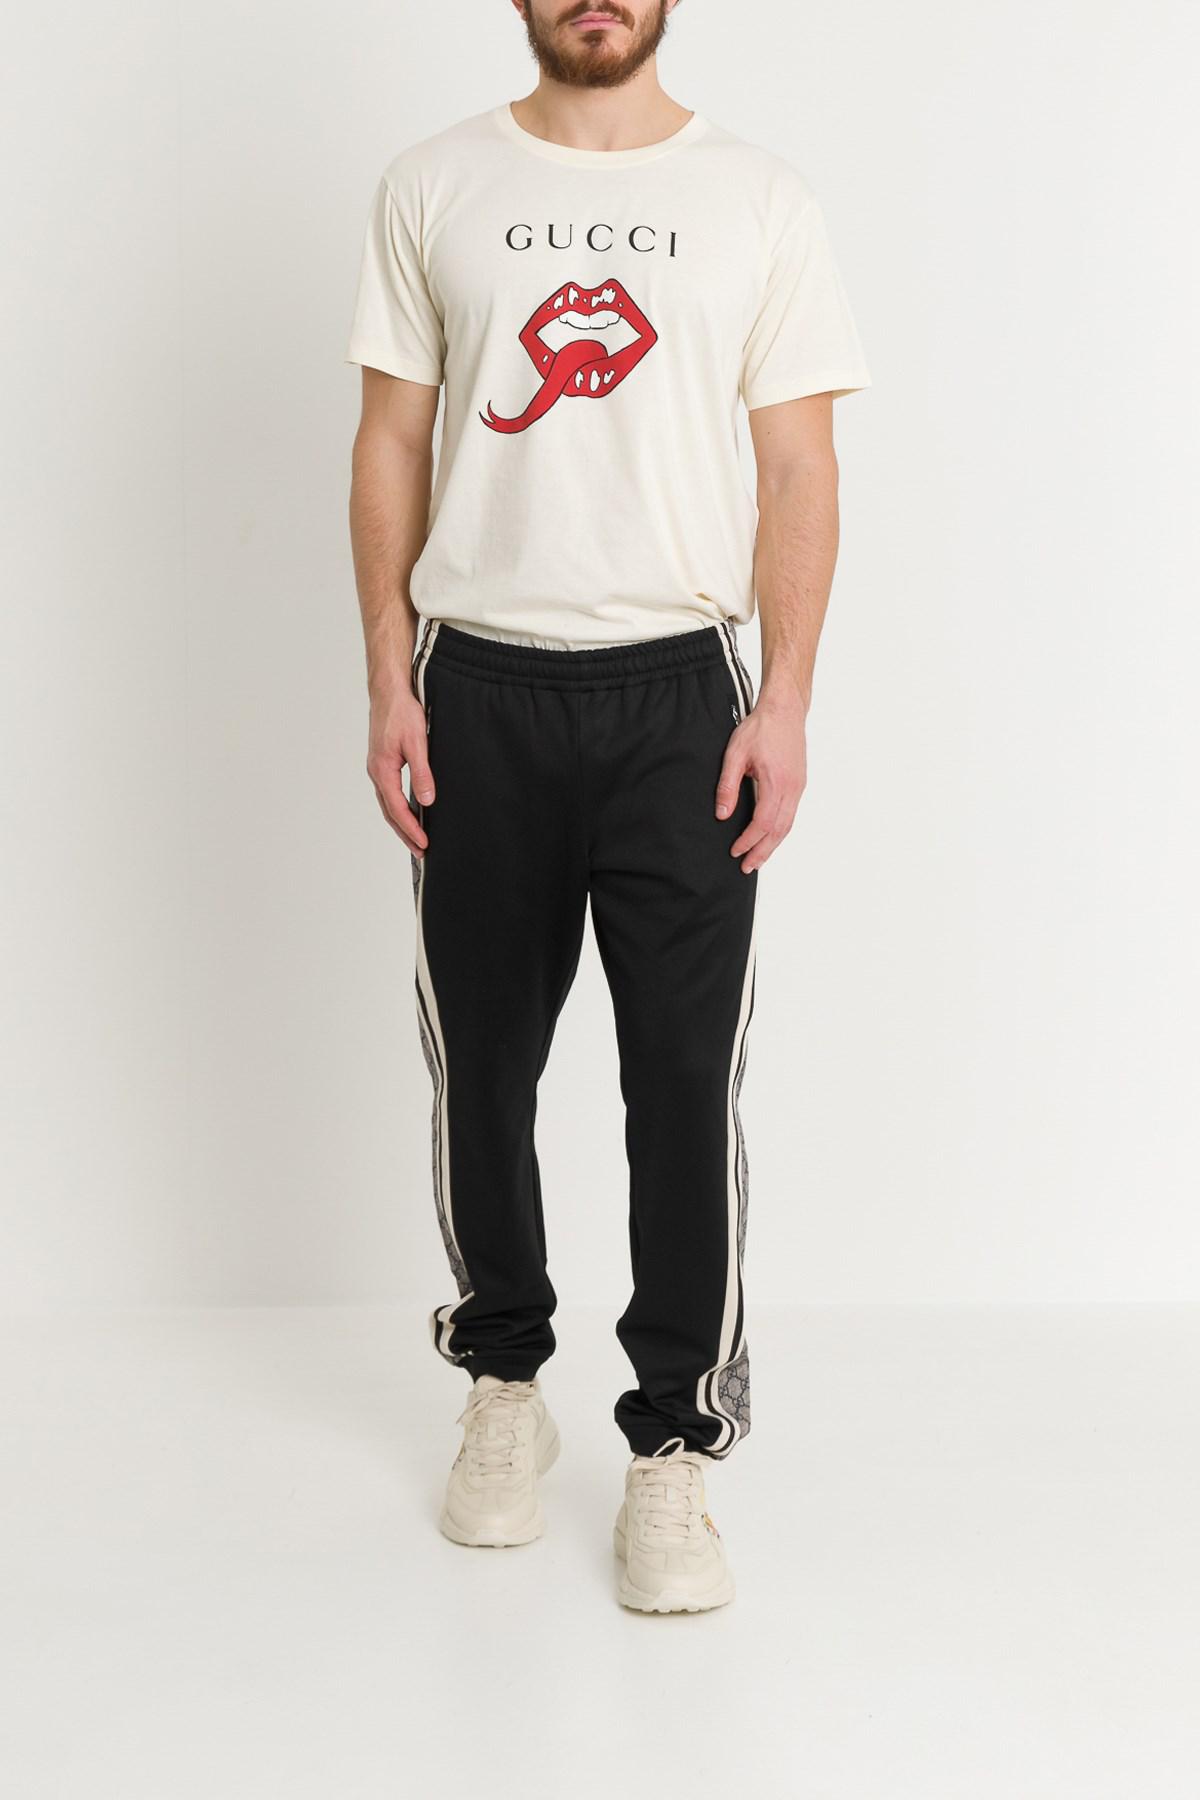 Gucci Oversized Jersey Jogging Trousers in Black for Men - Lyst